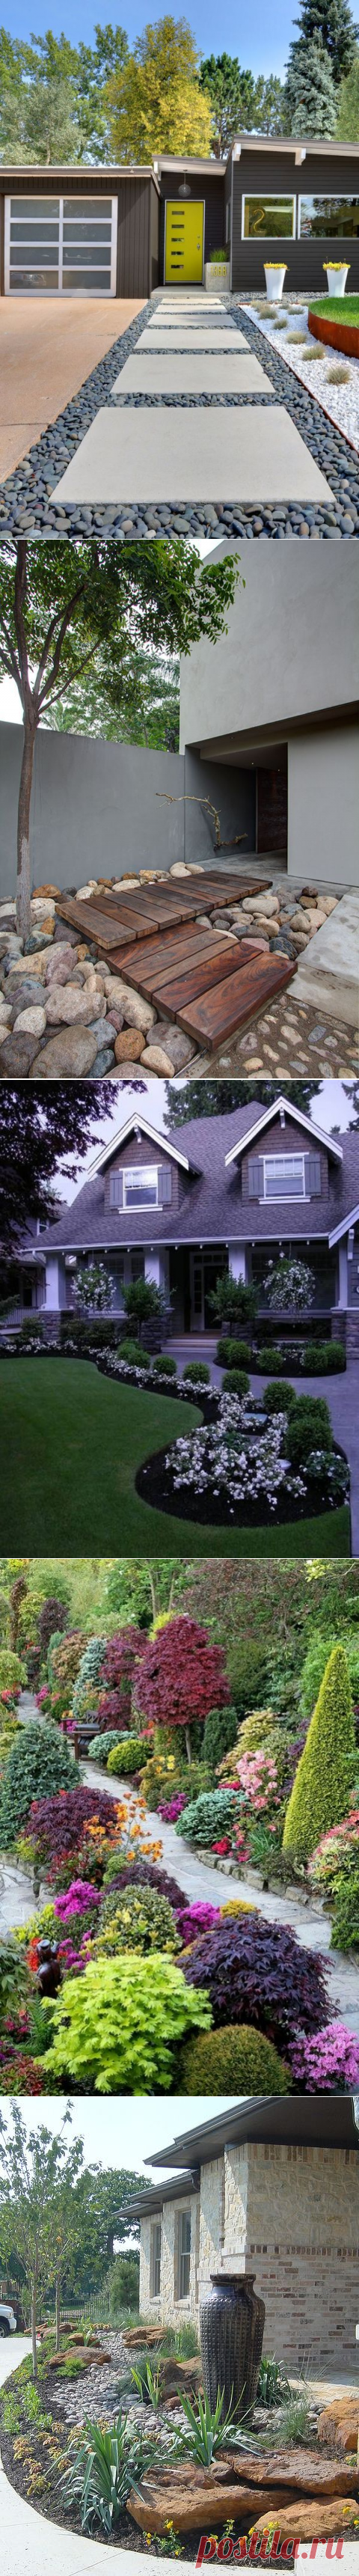 20+ Simple And Small Front Yard Landscaping Ideas (Low Maintenance)